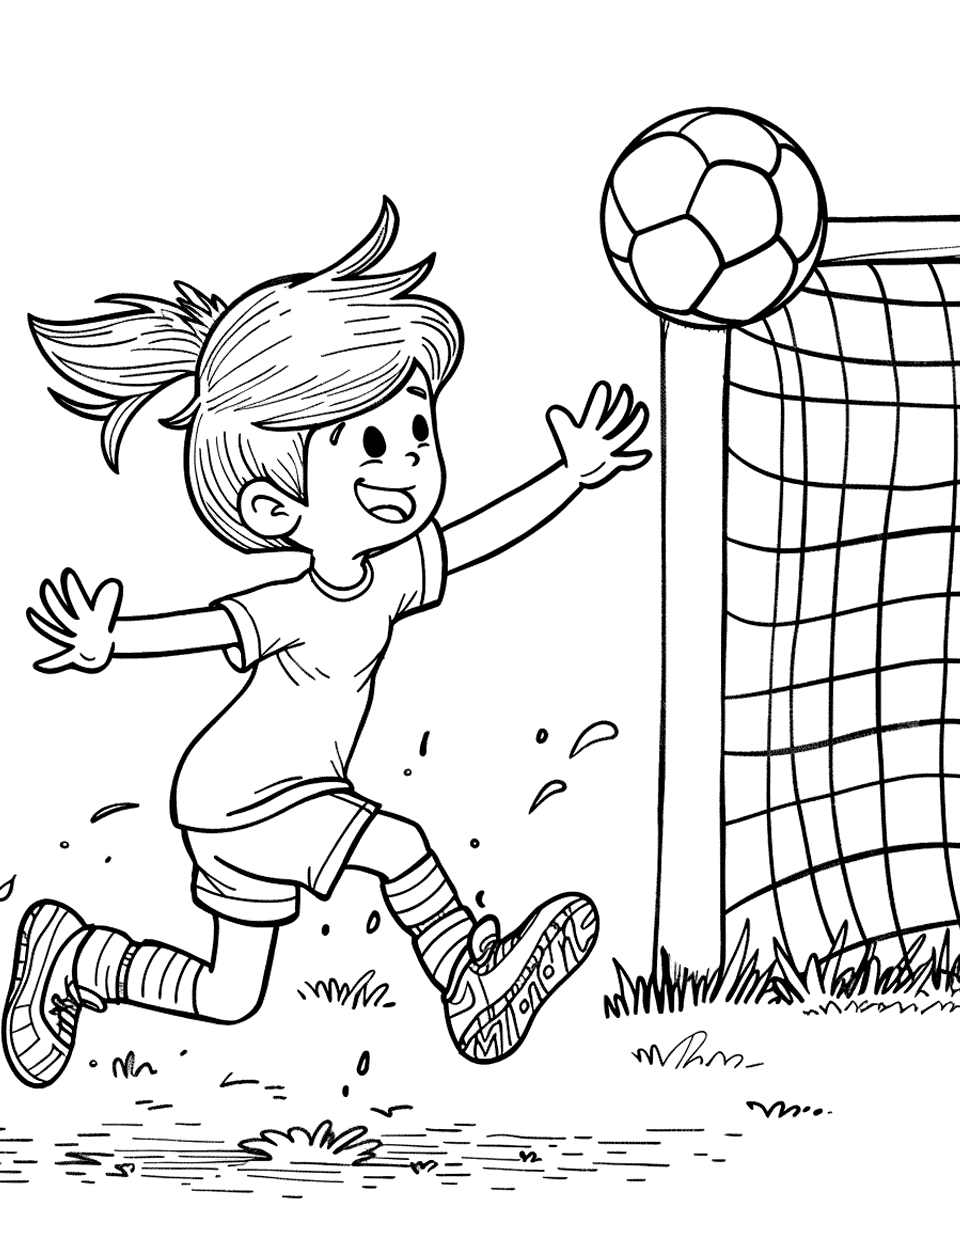 Soccer Goal Celebration Sports Coloring Page - A child kicking a soccer ball into the net, with arms raised in victory.